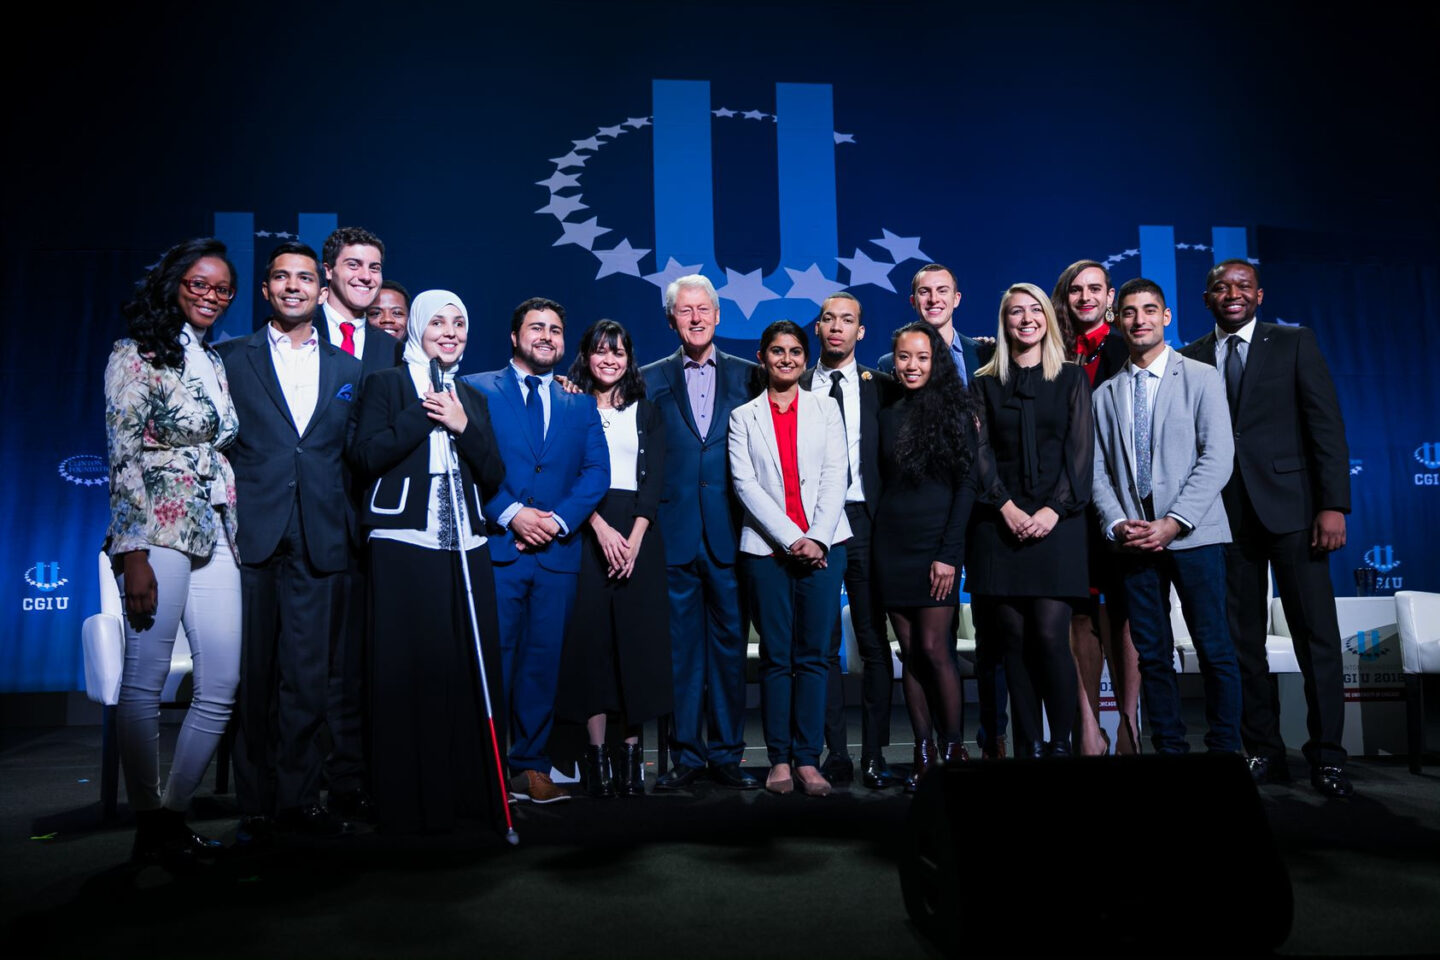 President Clinton takes a photo with students on stage